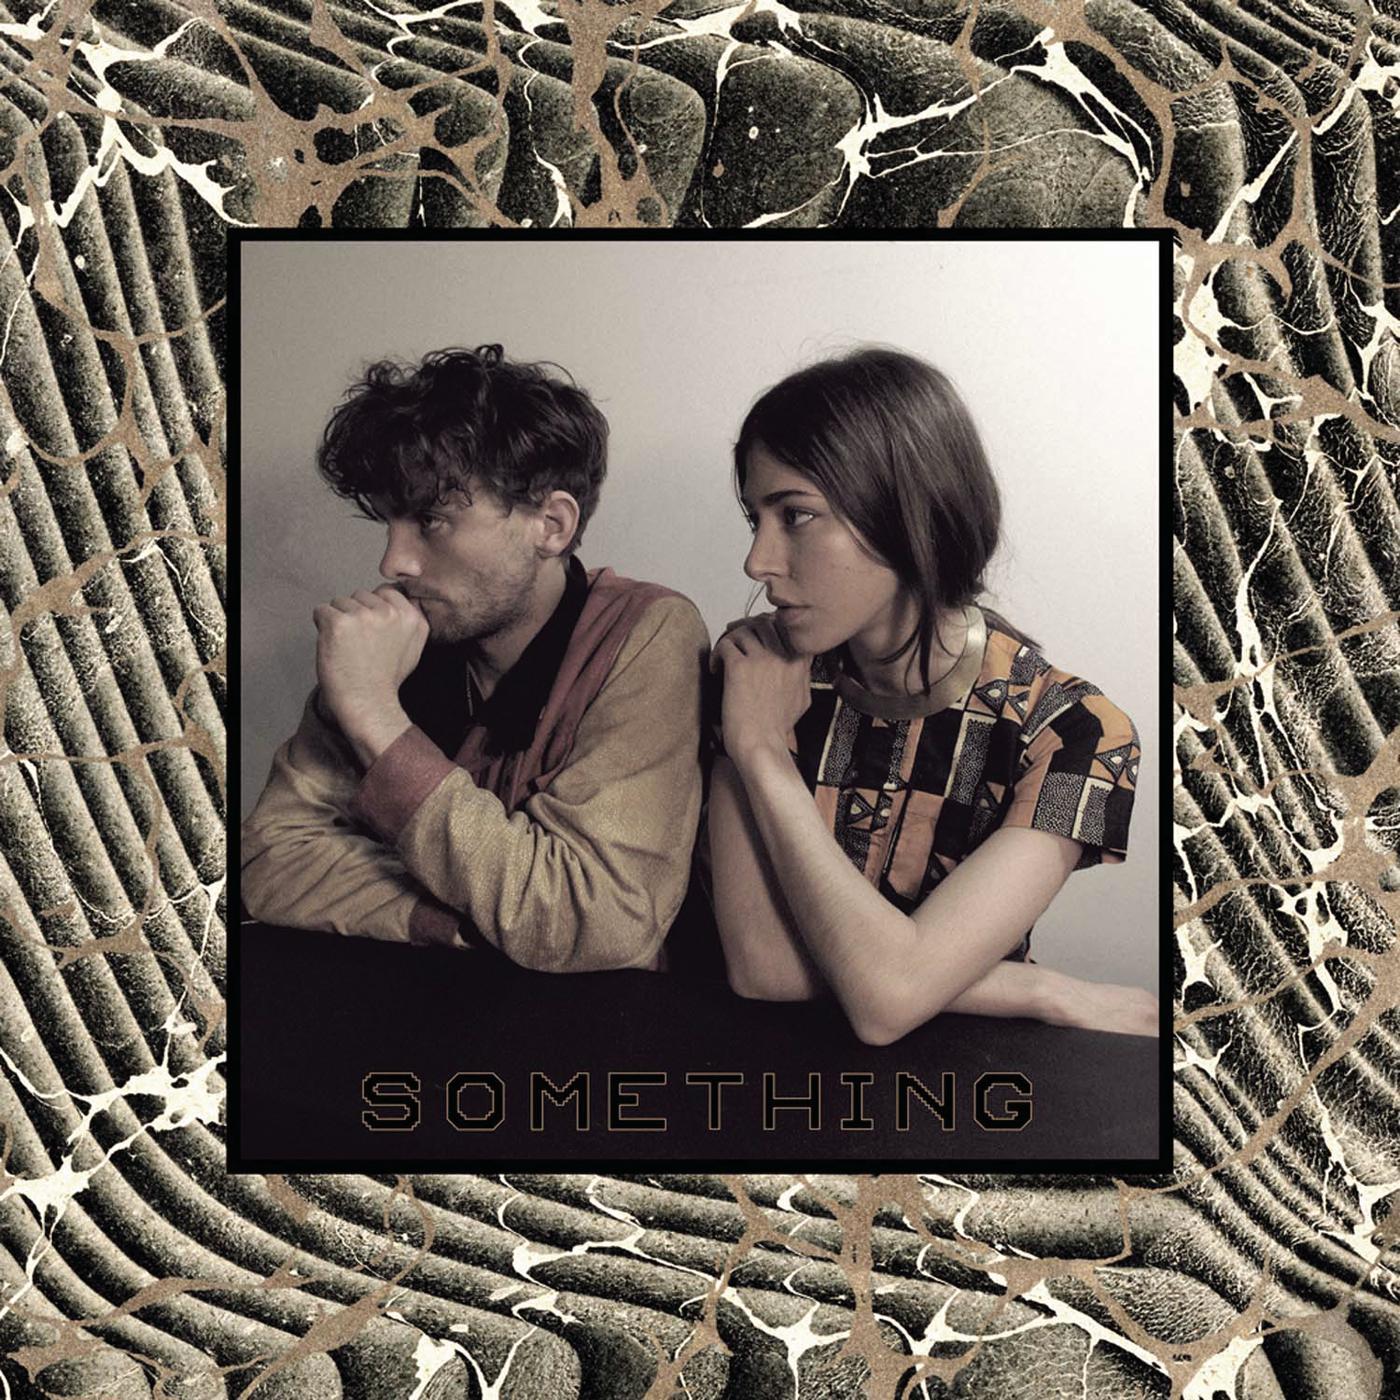 I Belong in Your Arms歌词 歌手Chairlift-专辑Something-单曲《I Belong in Your Arms》LRC歌词下载